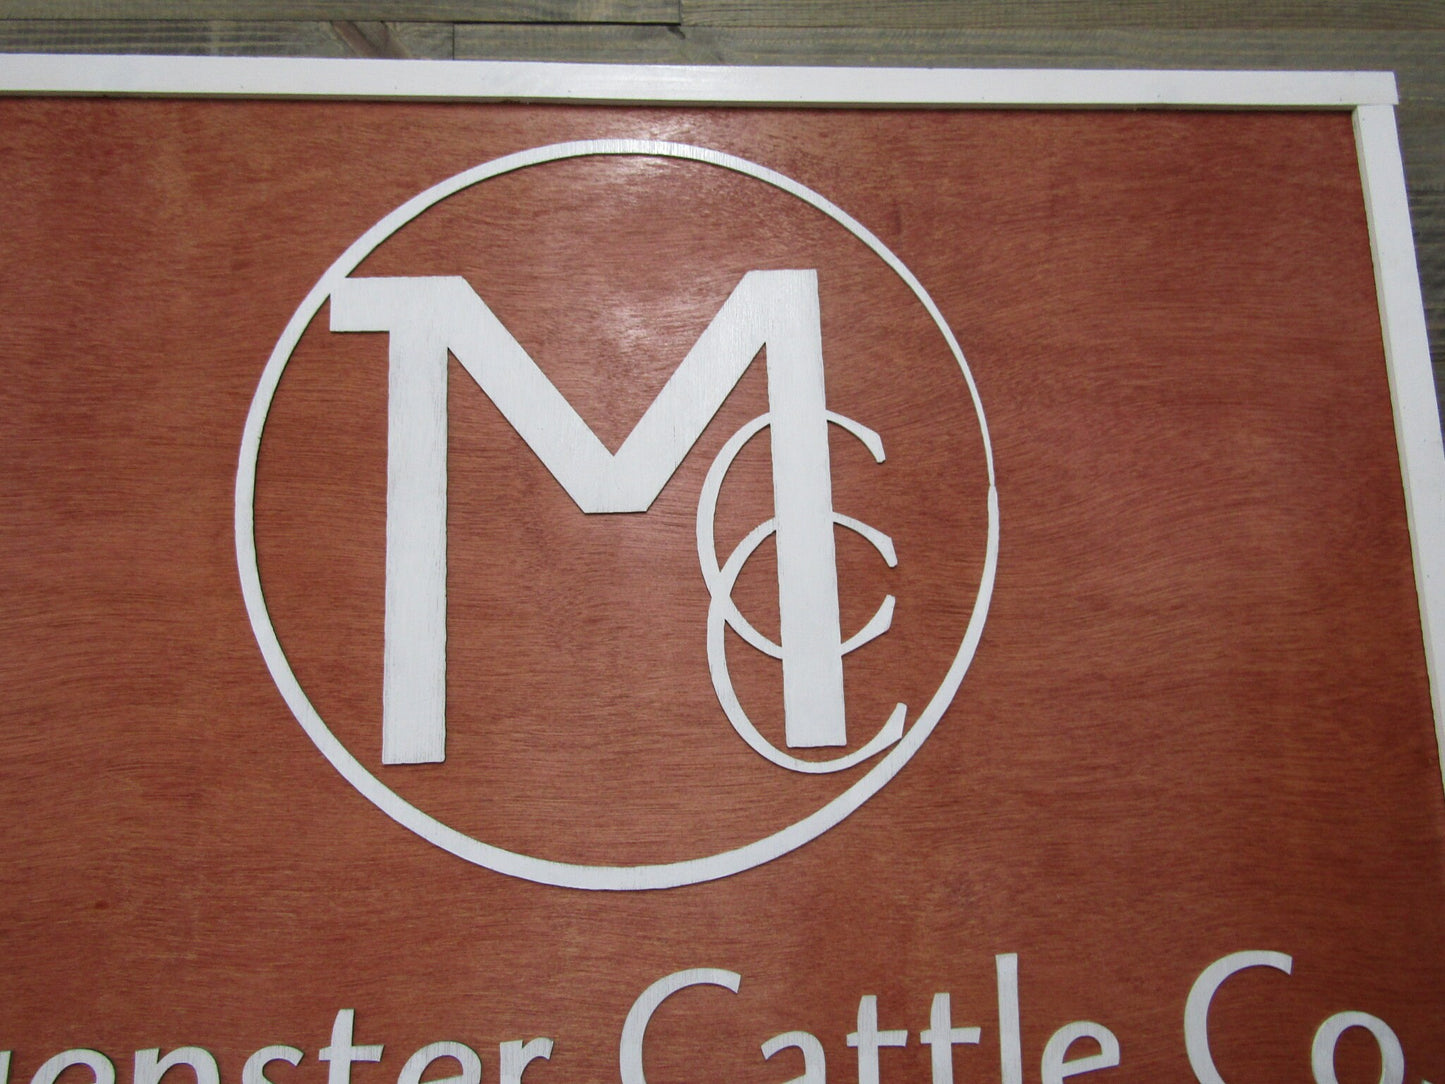 Custom Business Sign Rectangle 3D Large Custom Cattle Co Company Signage Indoor Outdoor Small Business Logo Laser Cut Wood Sign Barn Farm